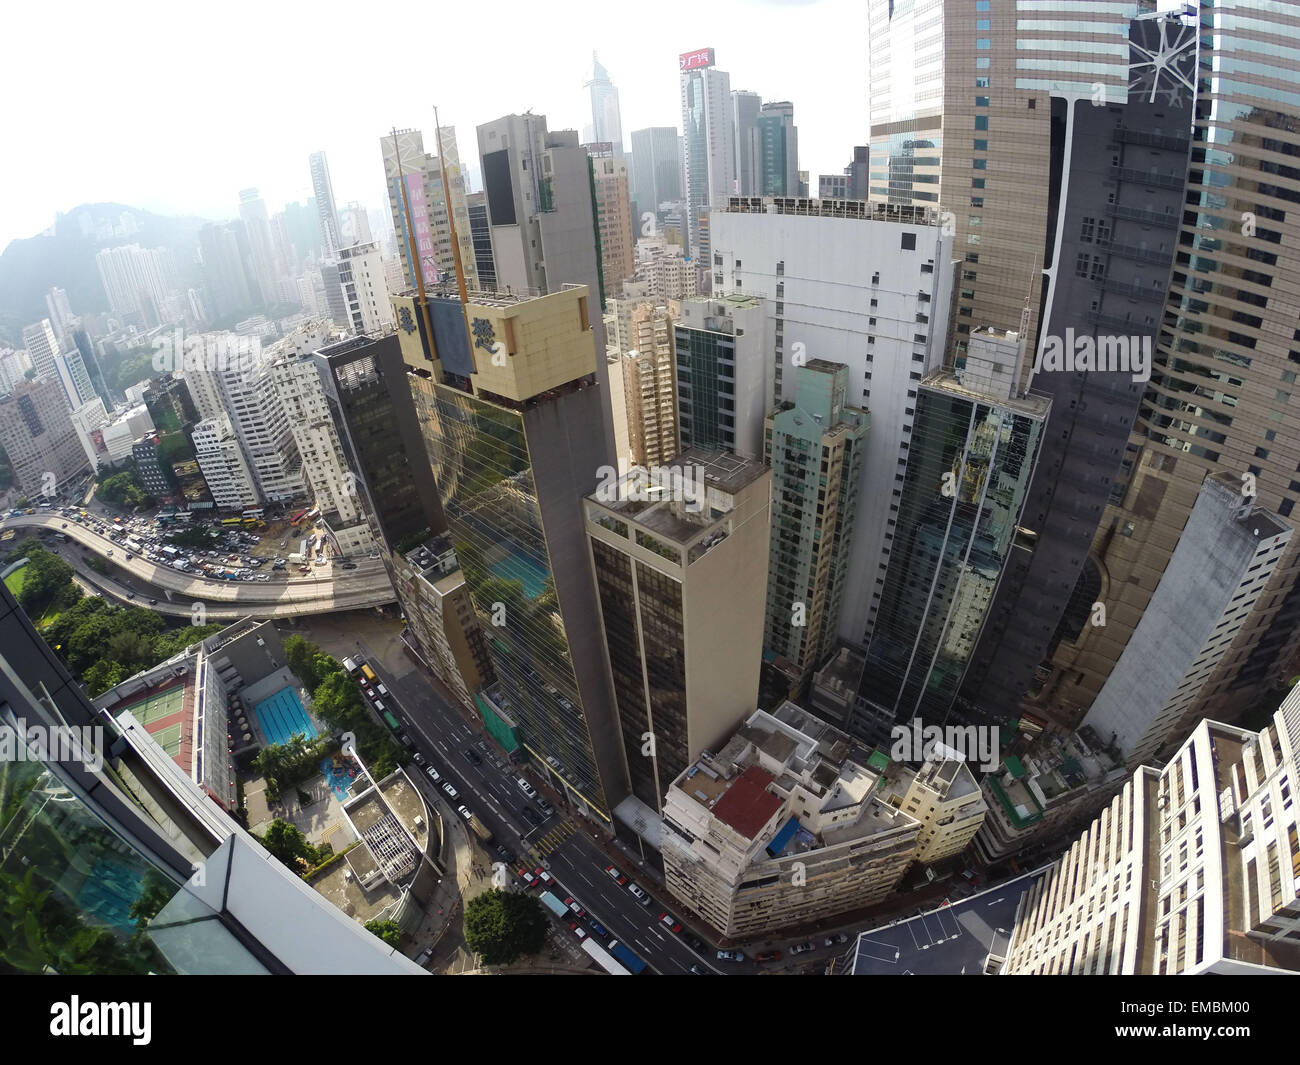 It's a photo of the Hong Kong Skyscrapers view from high and taken with a wide angle camera Stock Photo